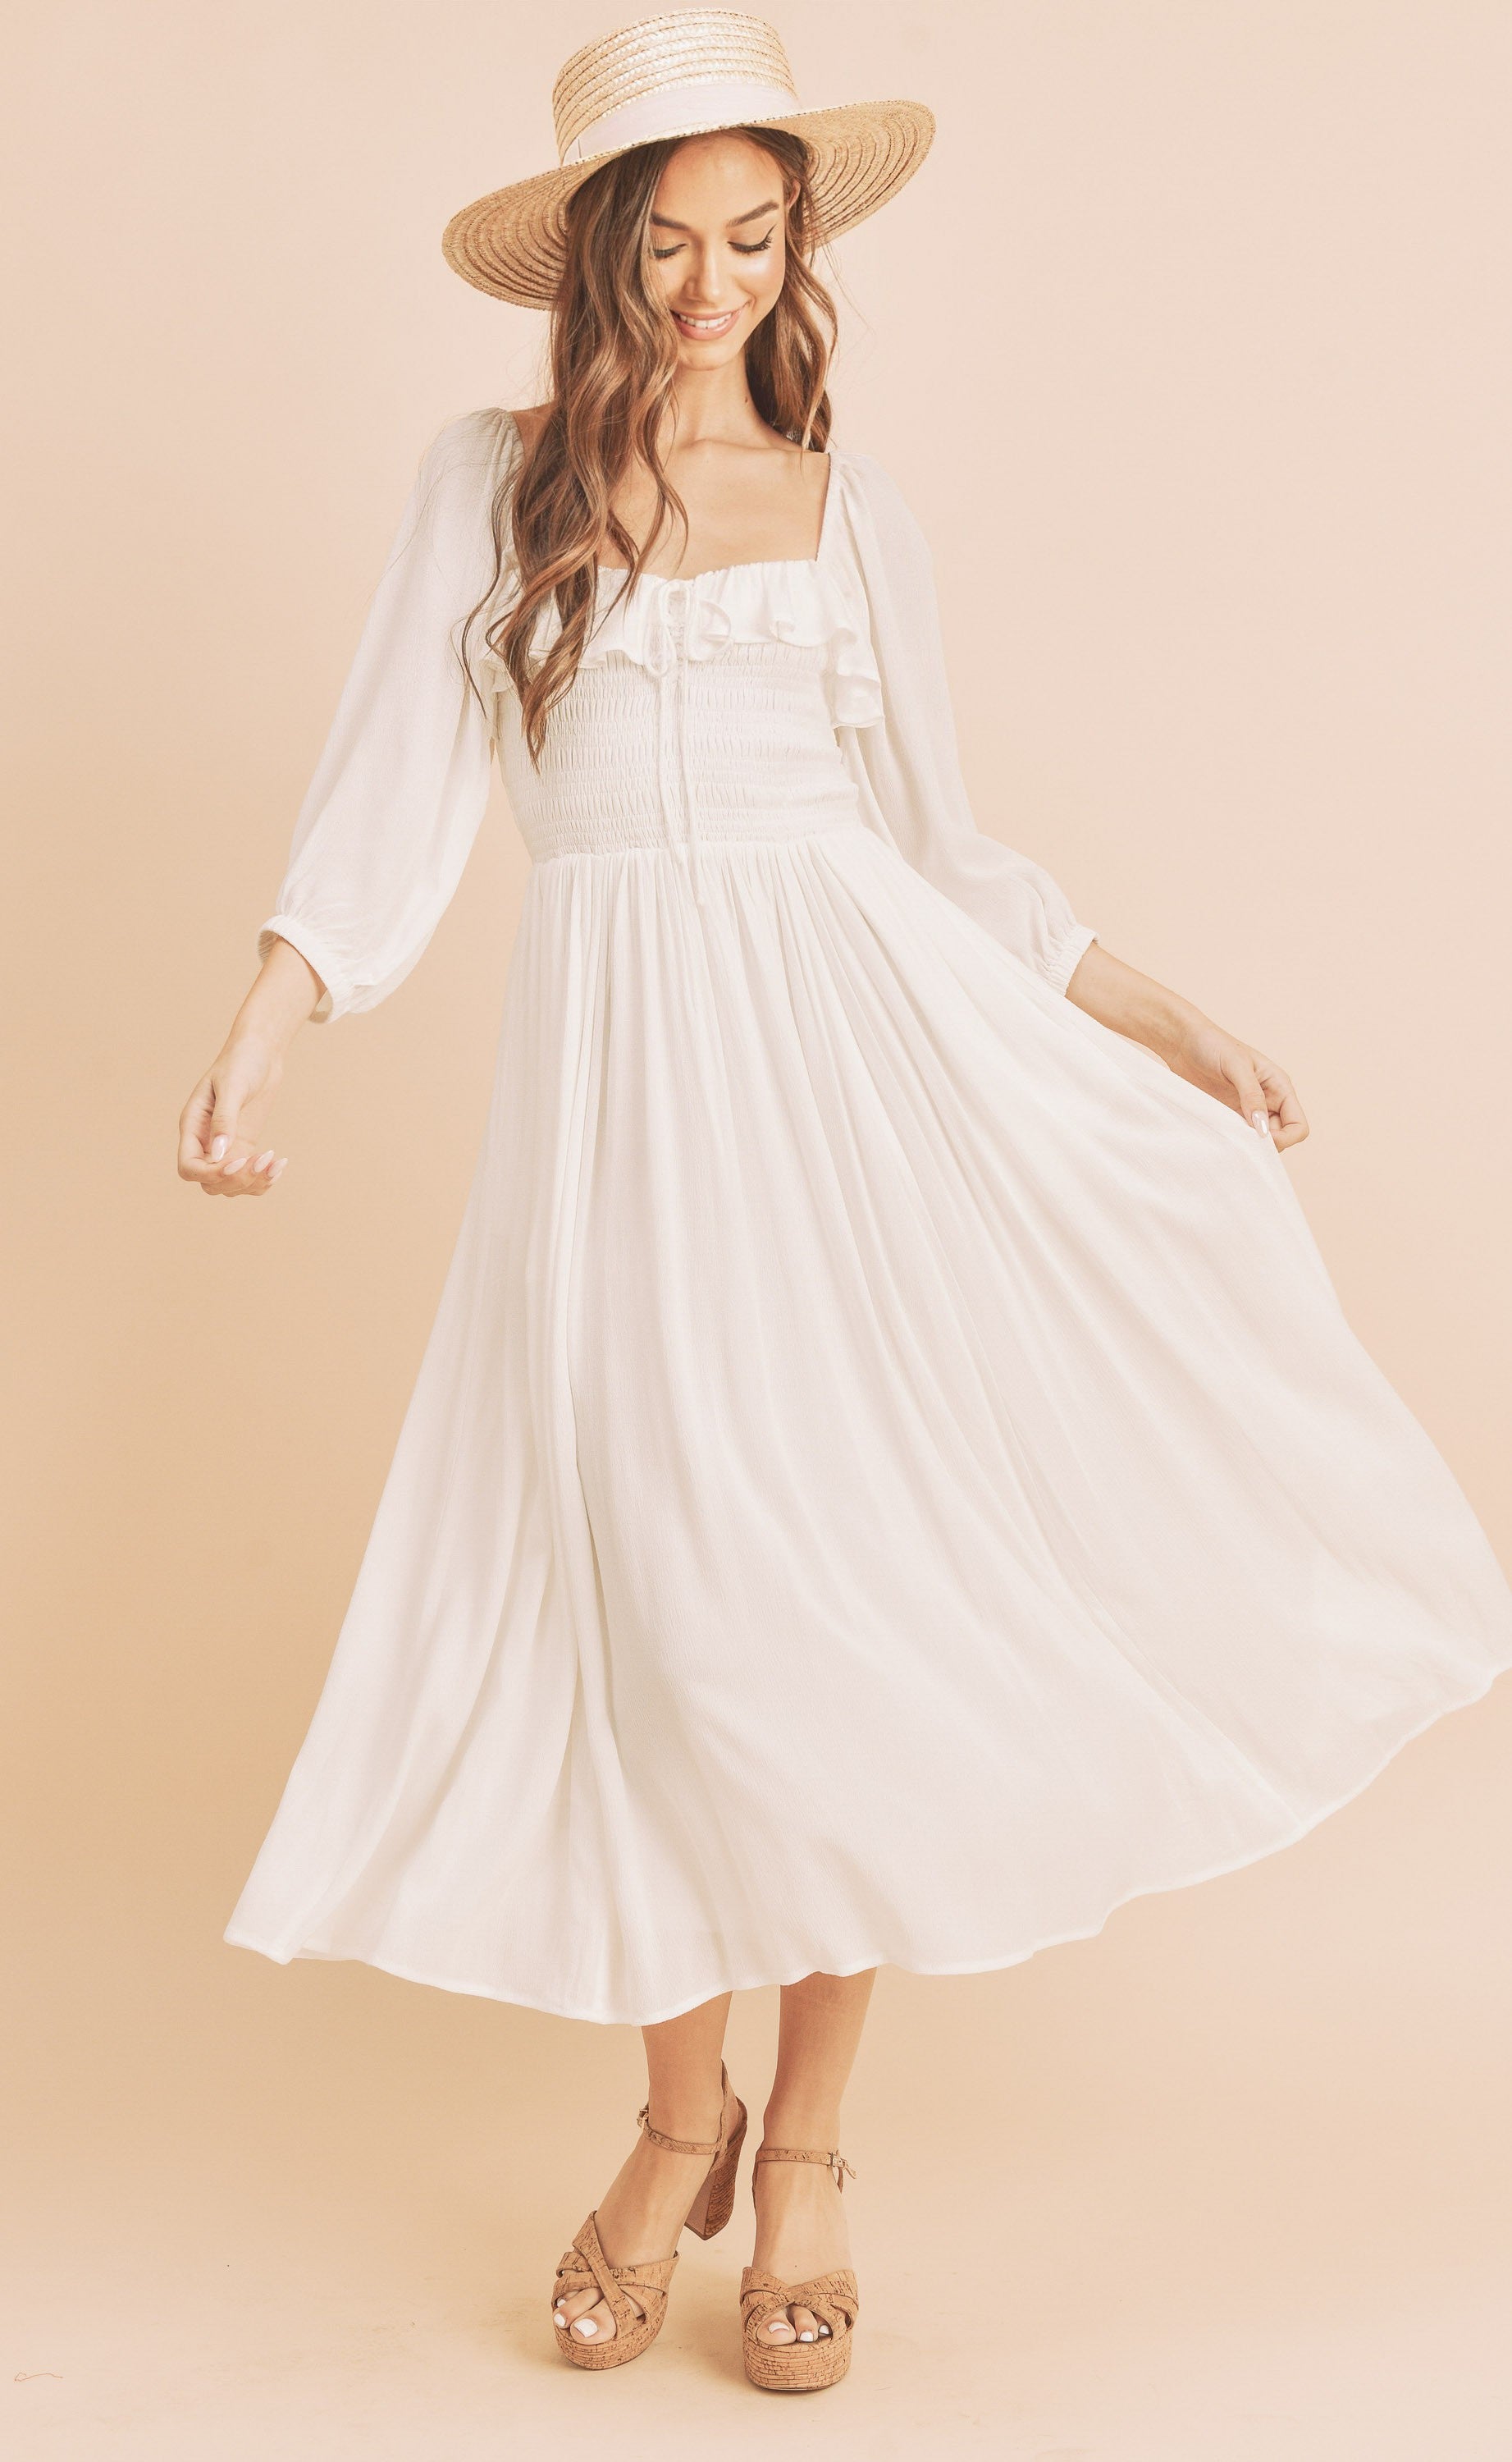 The Geri Dress boasts an eternally flattering shape, featuring a charmingly tied ruffled neckline, a smocked bodice, a lined skirt, and voluminous sleeves.